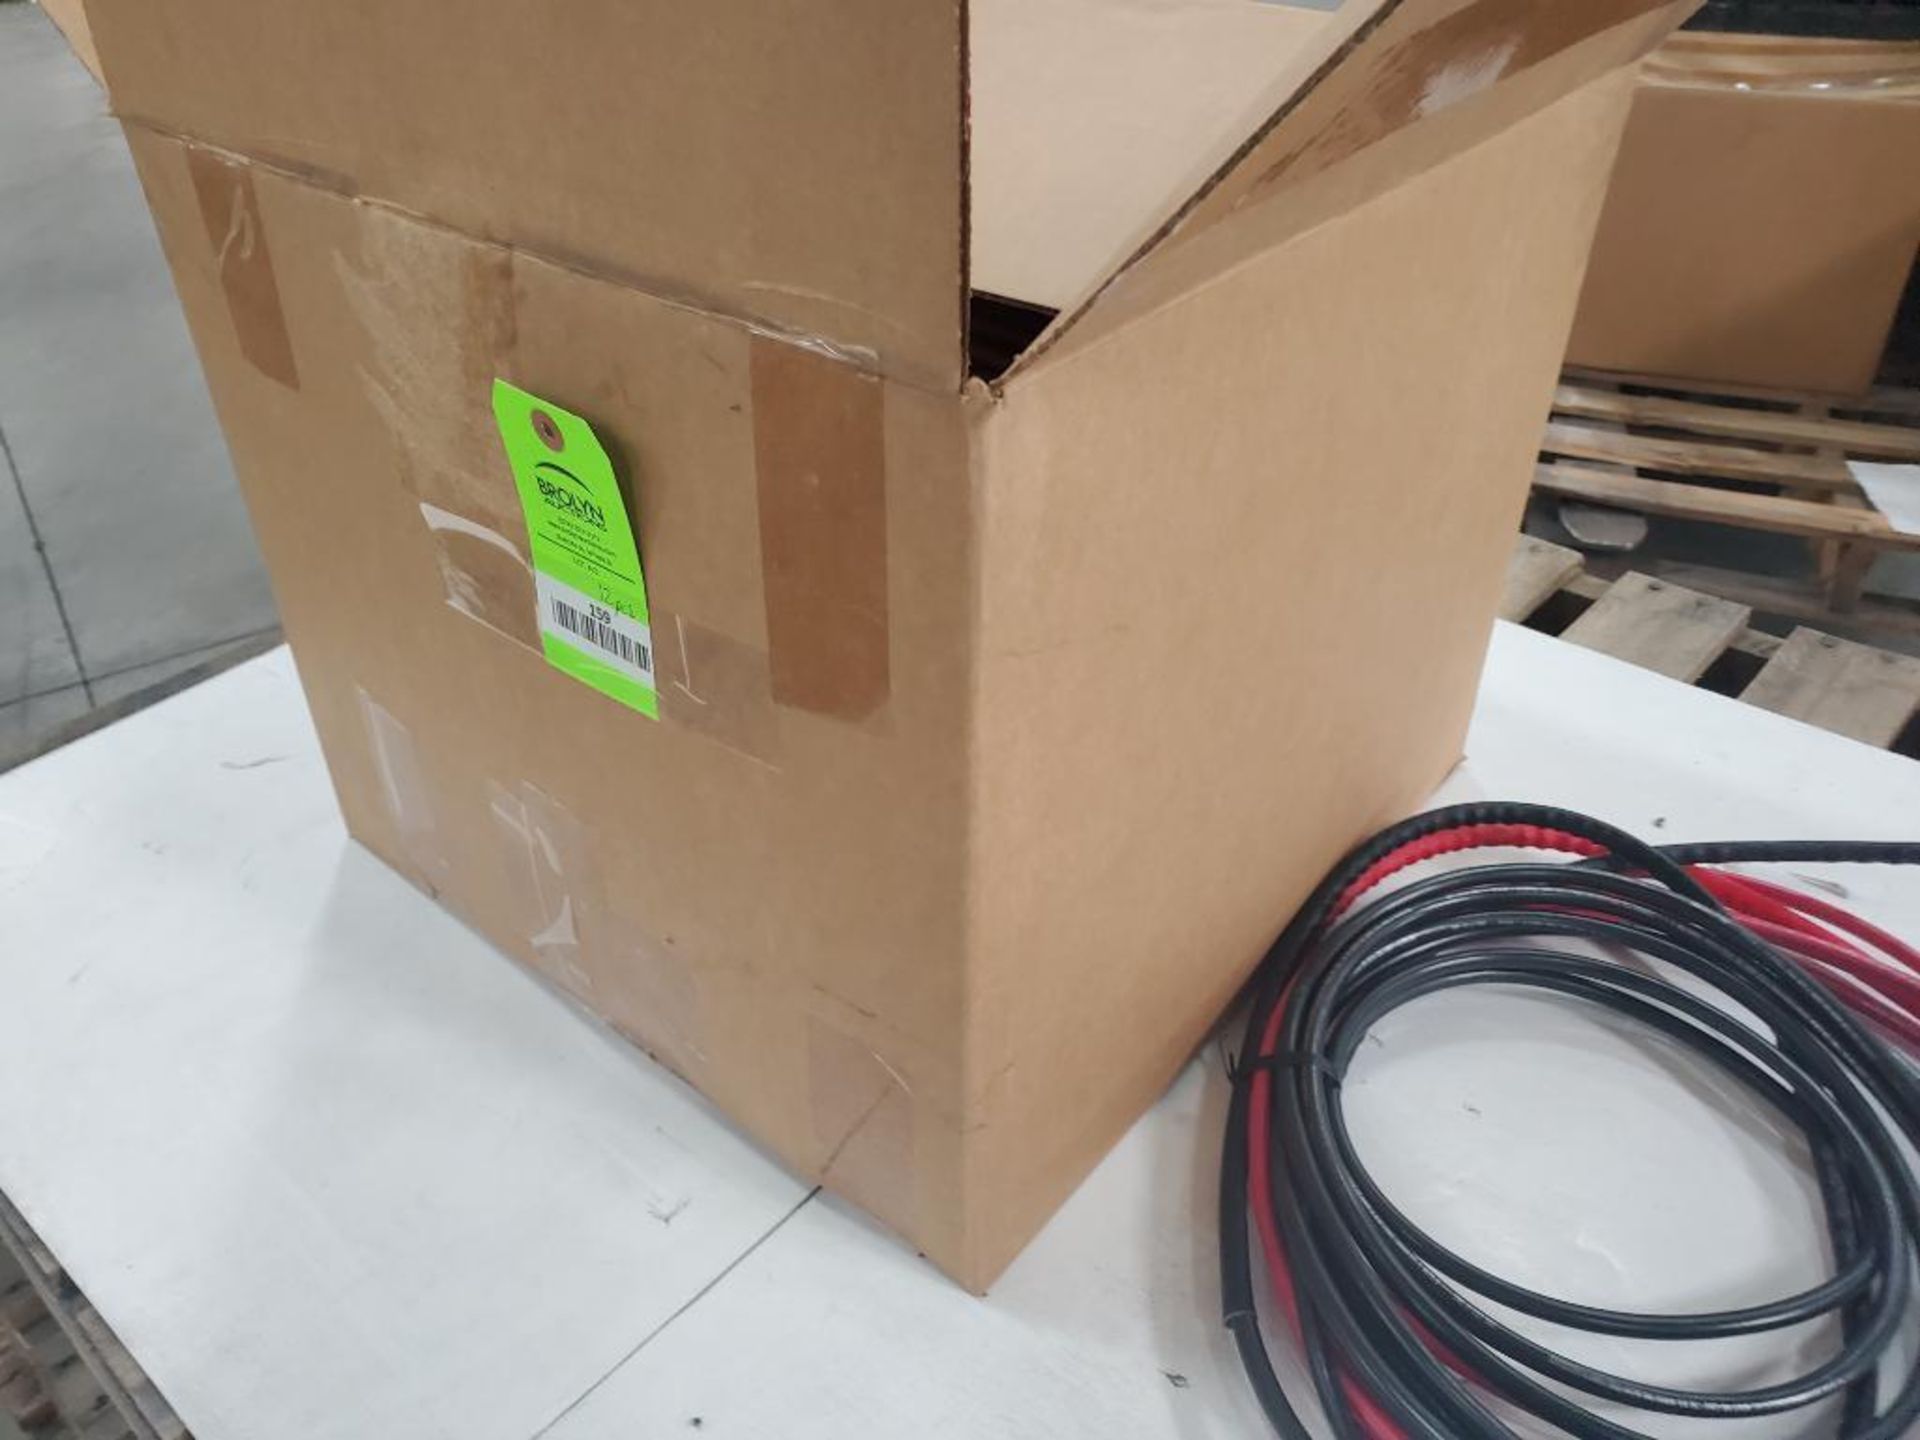 Qty 12 - Wire assembly. 175A 600V plug. New in box. - Image 6 of 11